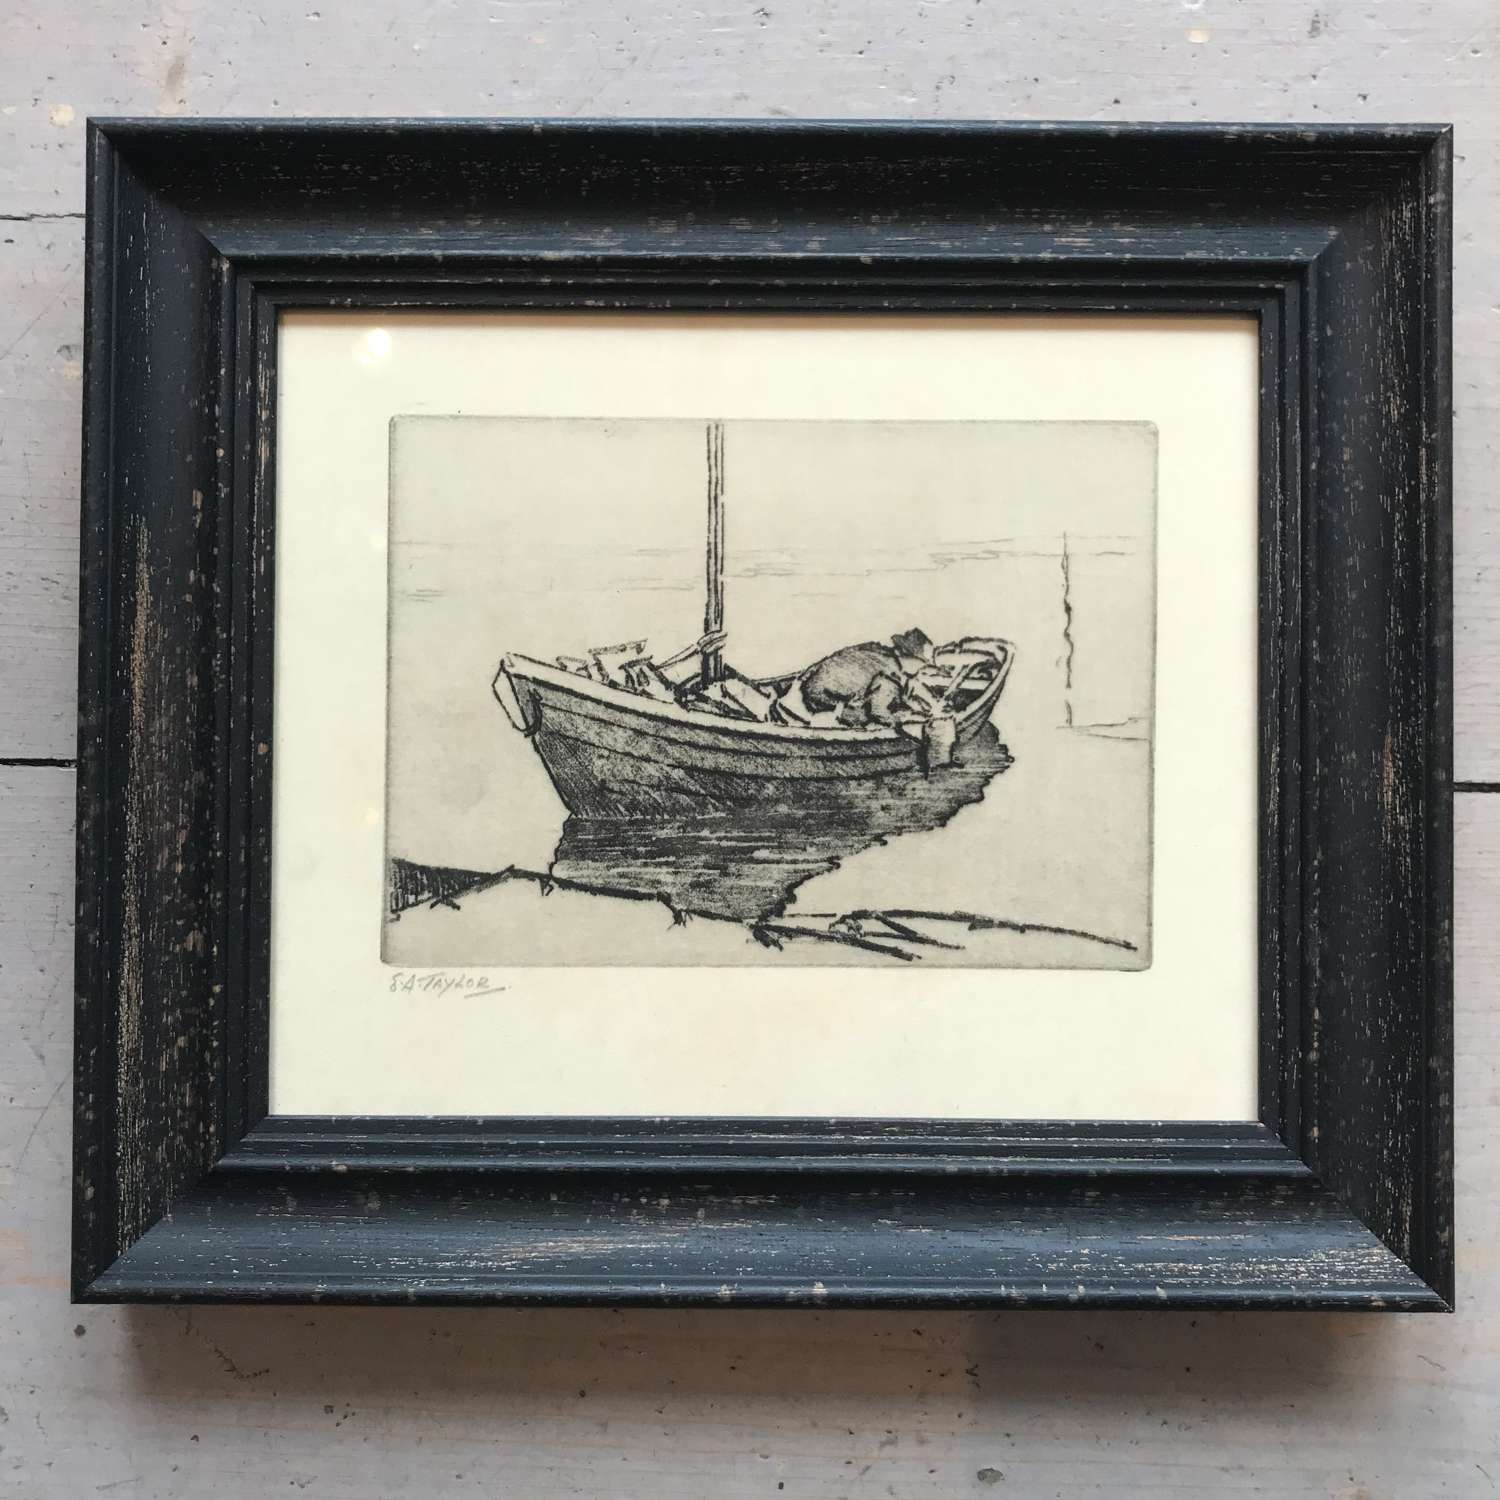 The Oysterman, Loch Ryan - Etching by E A Taylor